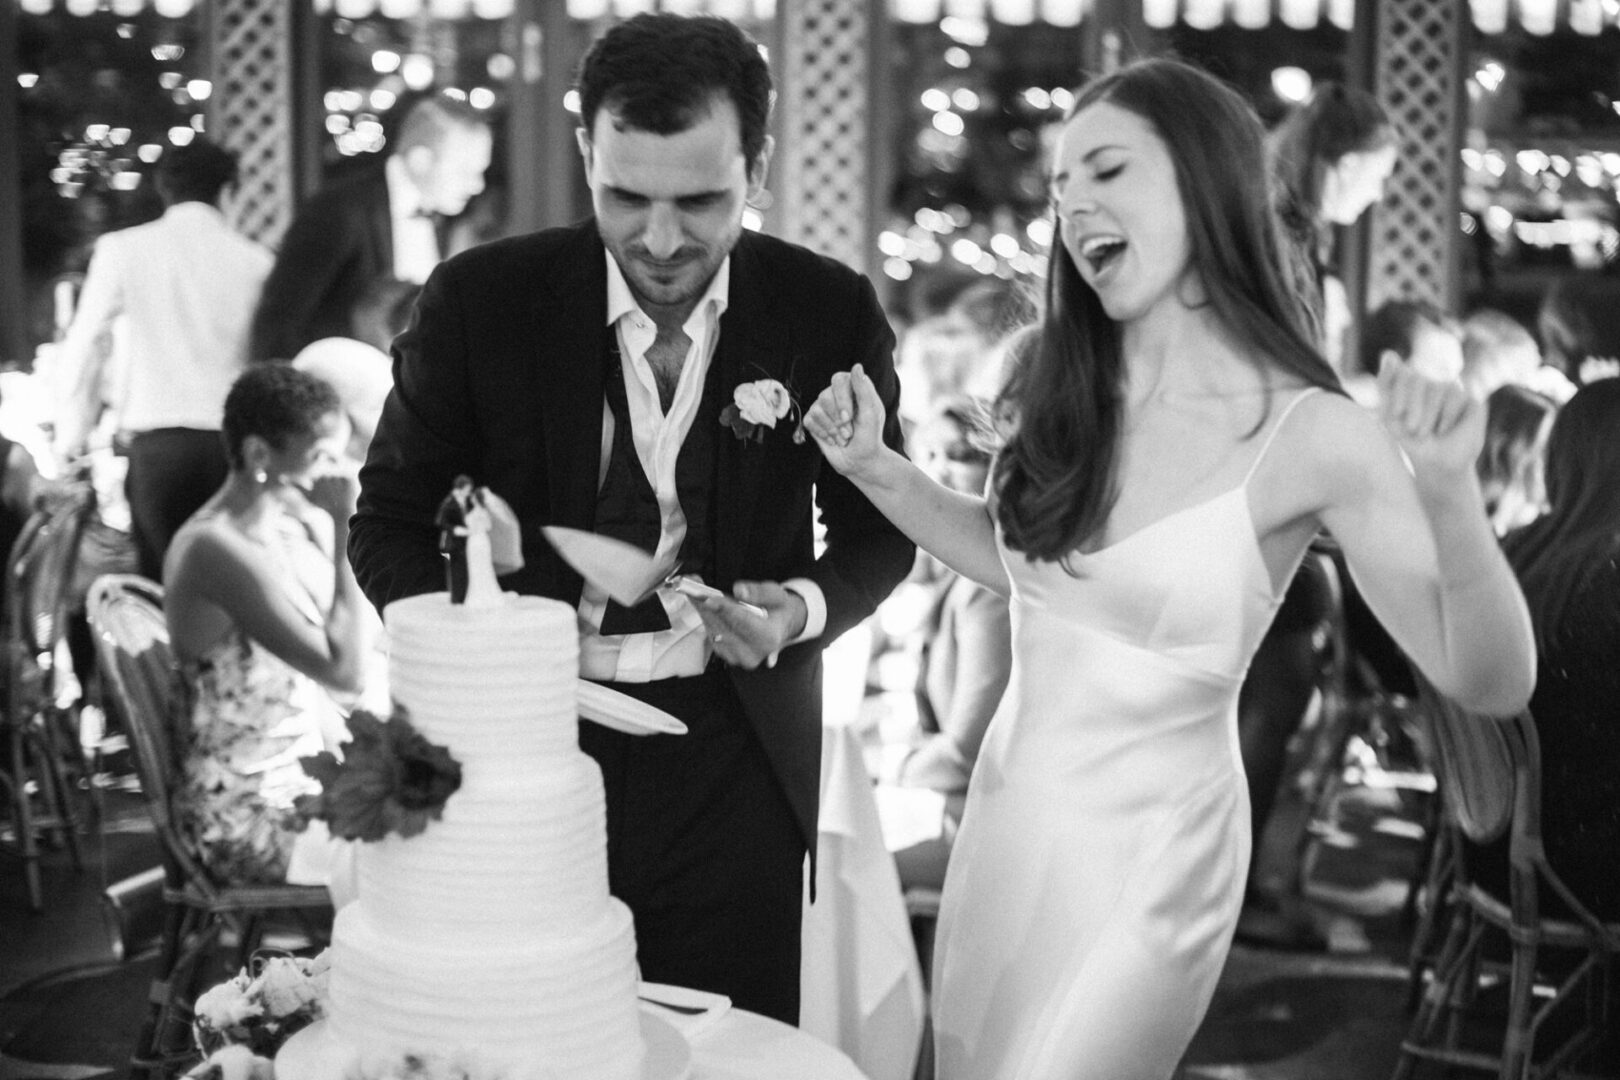 Couple dancing in front of cake